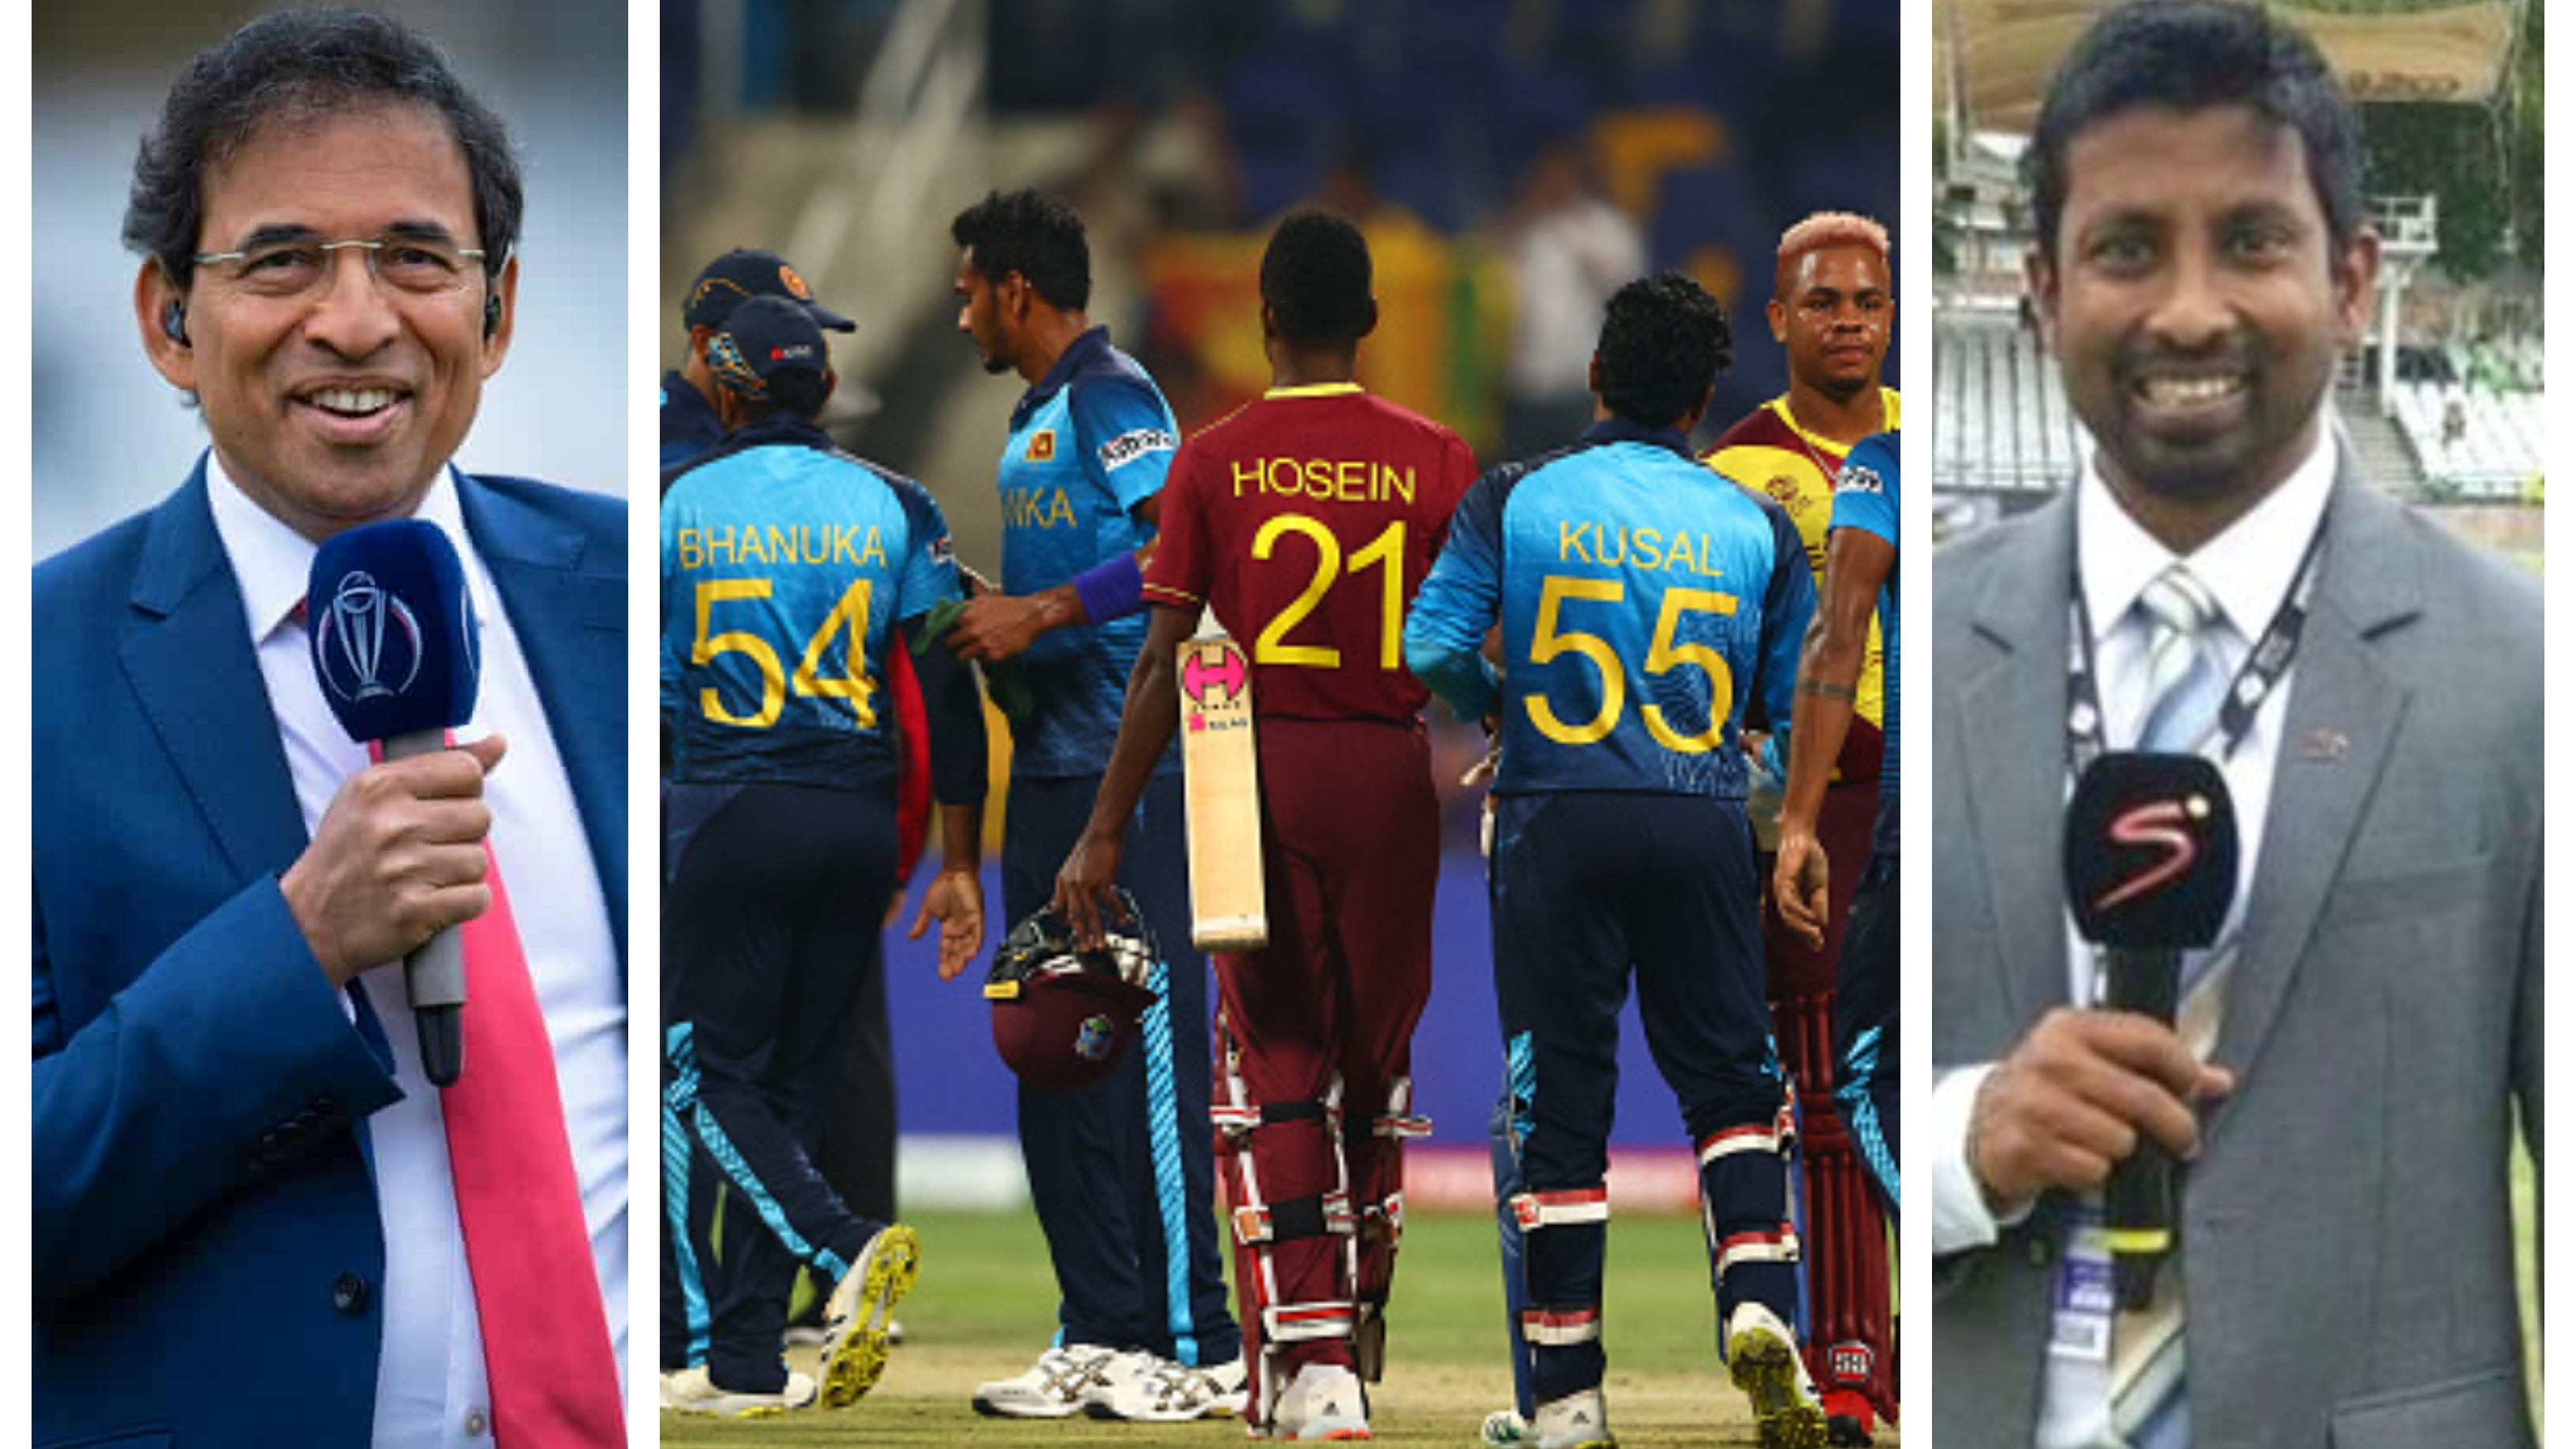 T20 World Cup 2021: Cricket fraternity reacts as clinical Sri Lanka end West Indies’ semi-final dream